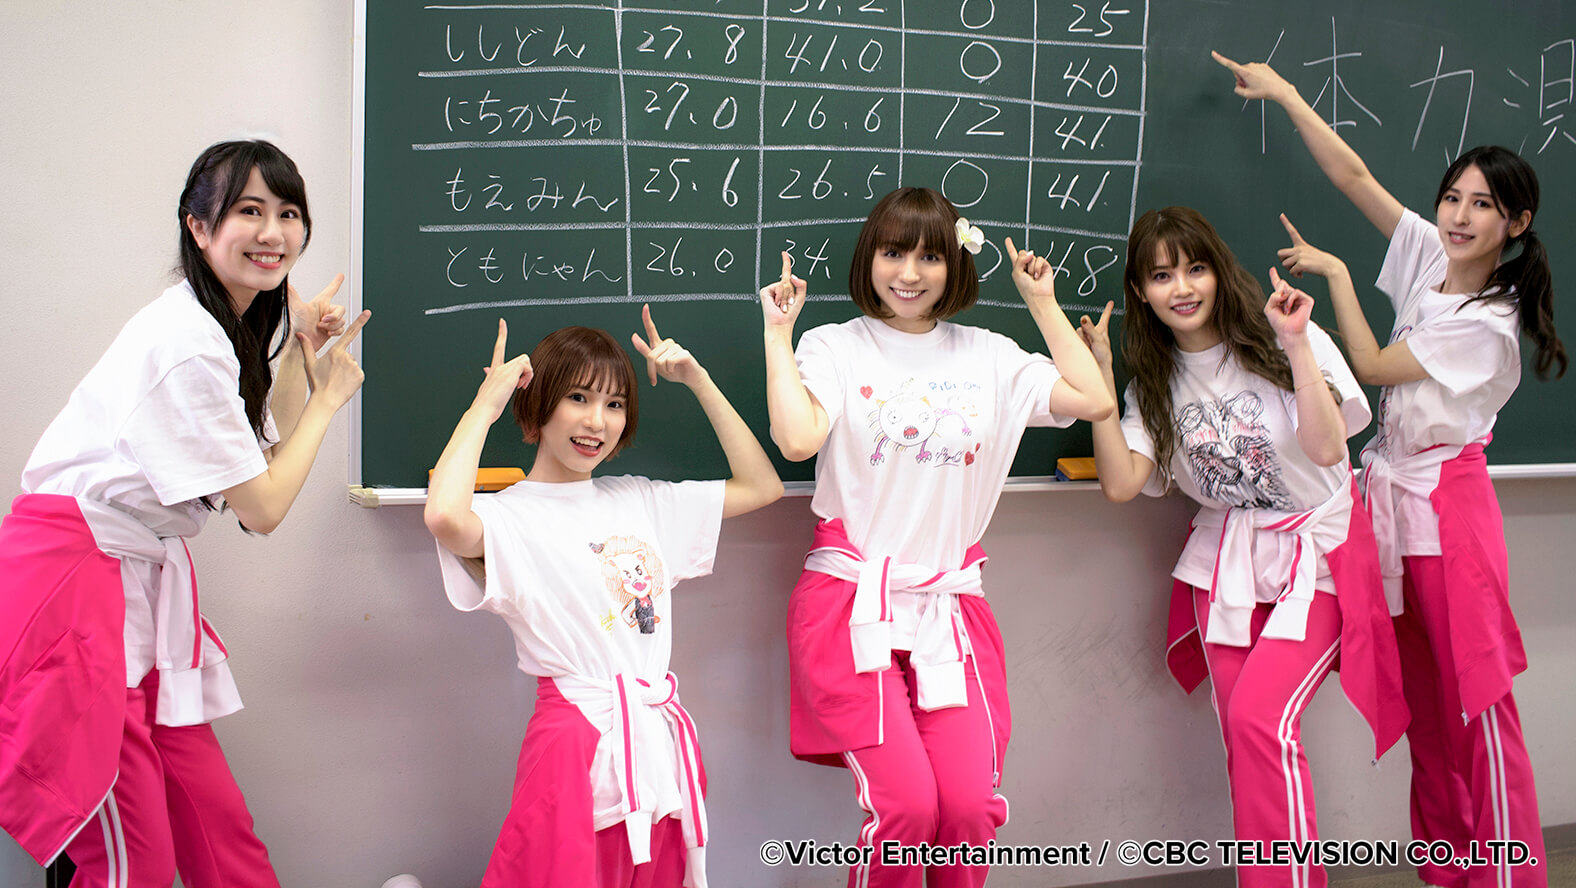 The members of voice actress-girl band PsyChe wore custom-made T-shirts printed with the Roland DG BT-12 direct-to-garment printer.